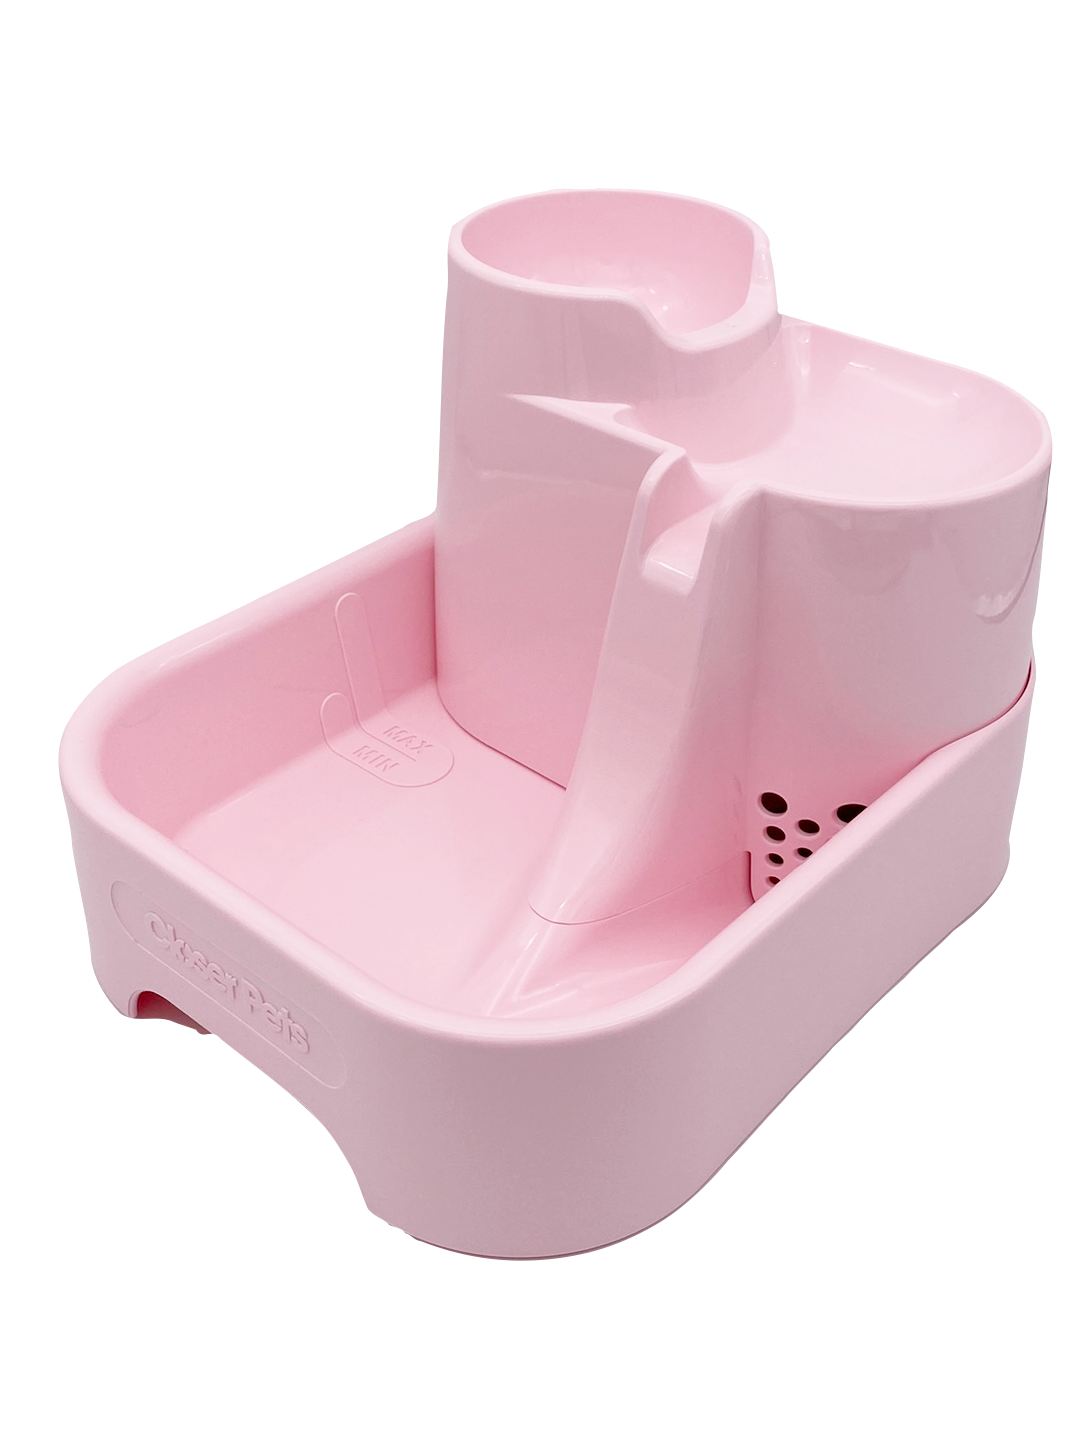 Closer Pets Three-level Two-litre Pet Fountain - Pink (CP335UK-BL)